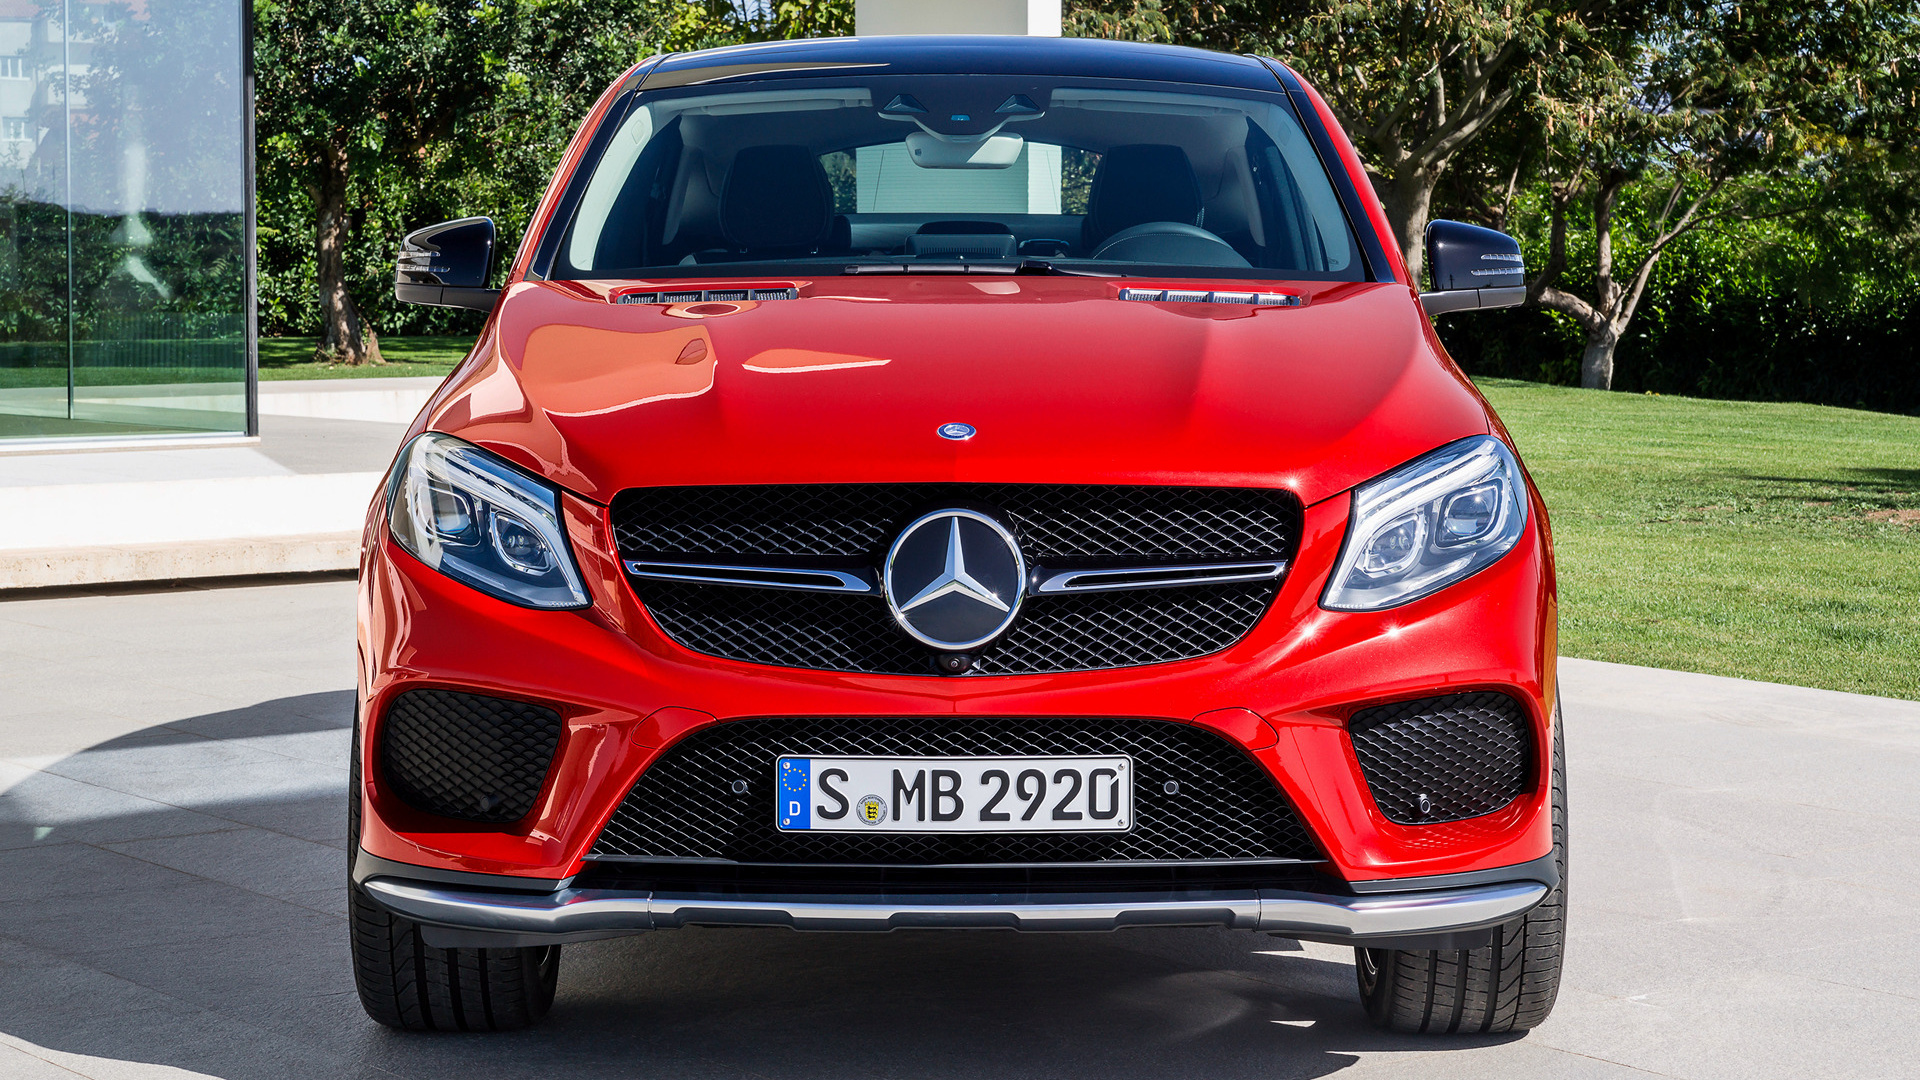 Mercedes-Benz GLE, Coupe elegance, Red car allure, Front view beauty, 1920x1080 Full HD Desktop